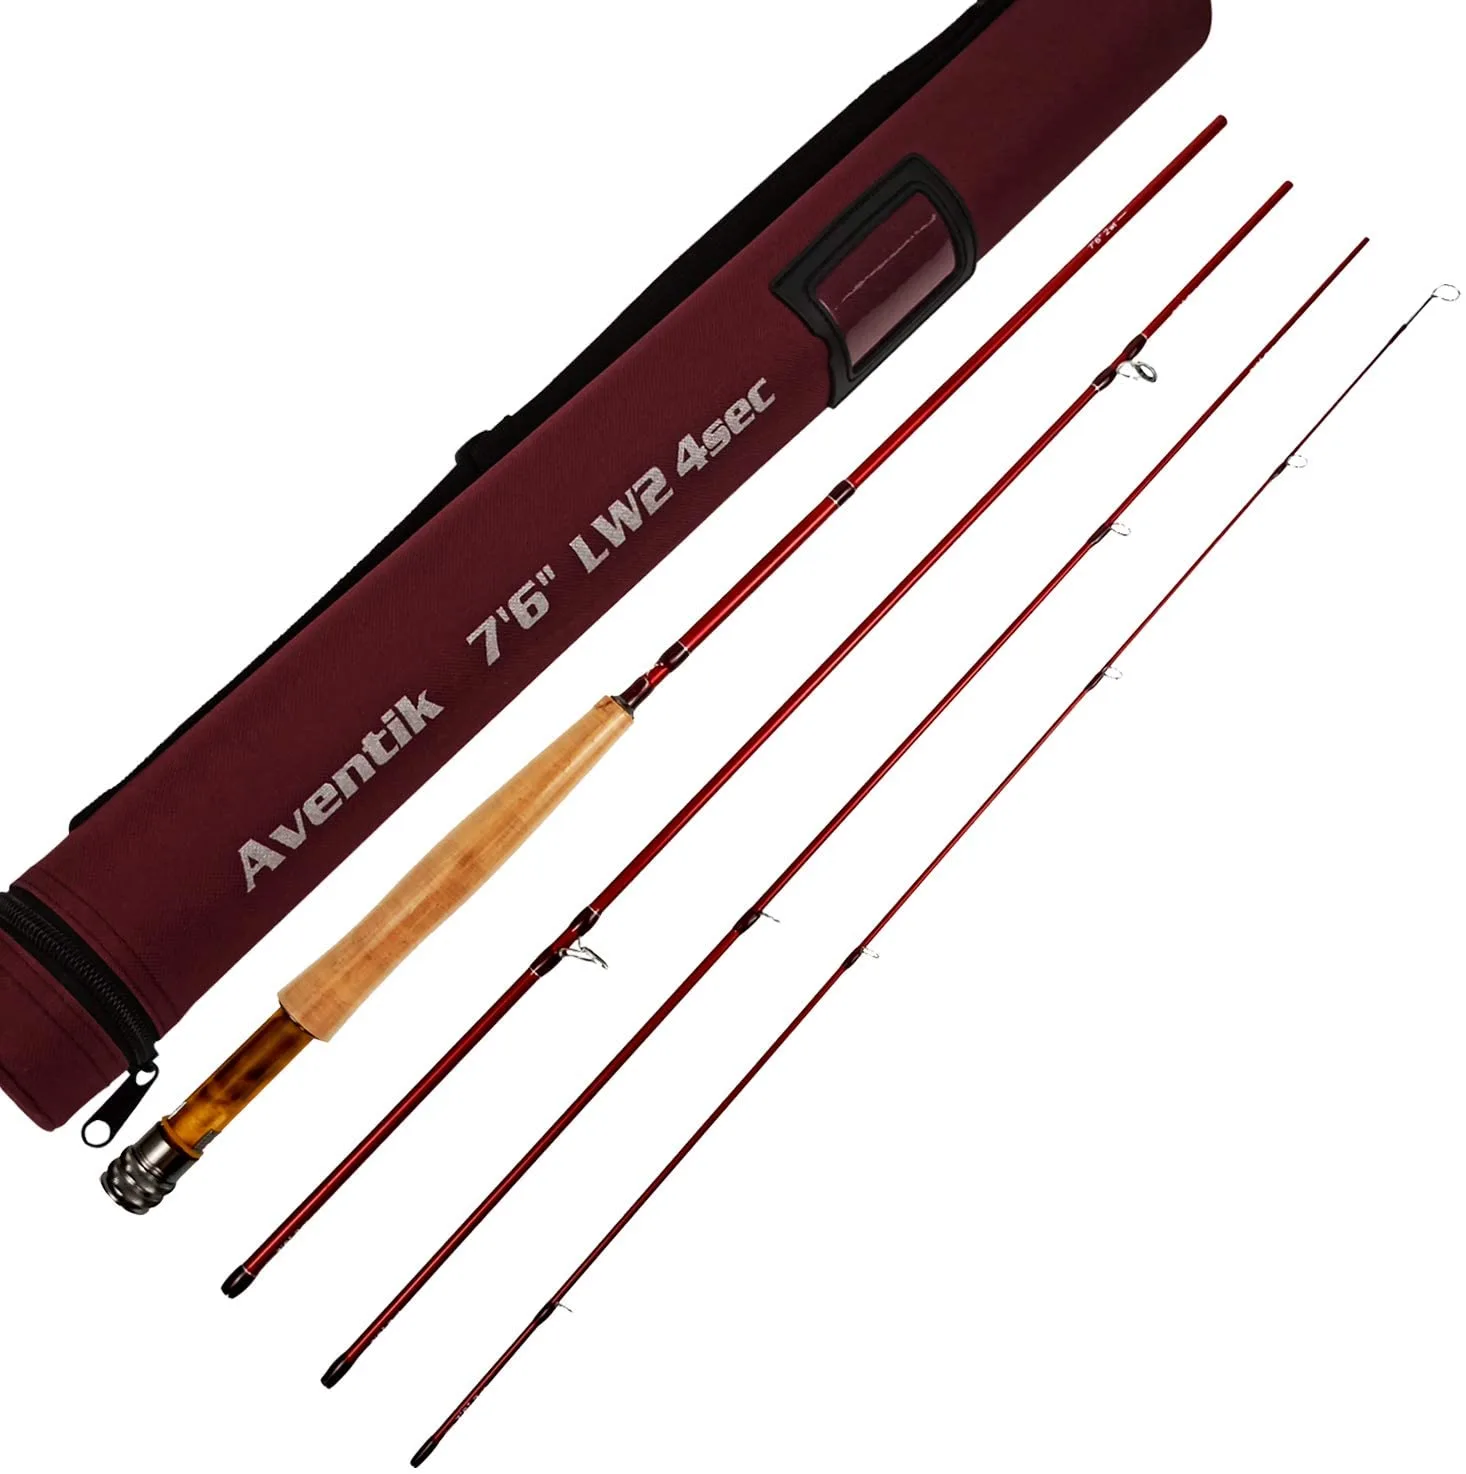  Z Aventik Economic 6 Pieces Travel Fly Fishing rods 8'9”  LW4/5, 9'1'' LW5/6, 10'3” LW2/3, Three Fashion Colors, Fast Action, Light  Weight, Super Compact (Camo, 8'9'' LW4/5) : Sports 